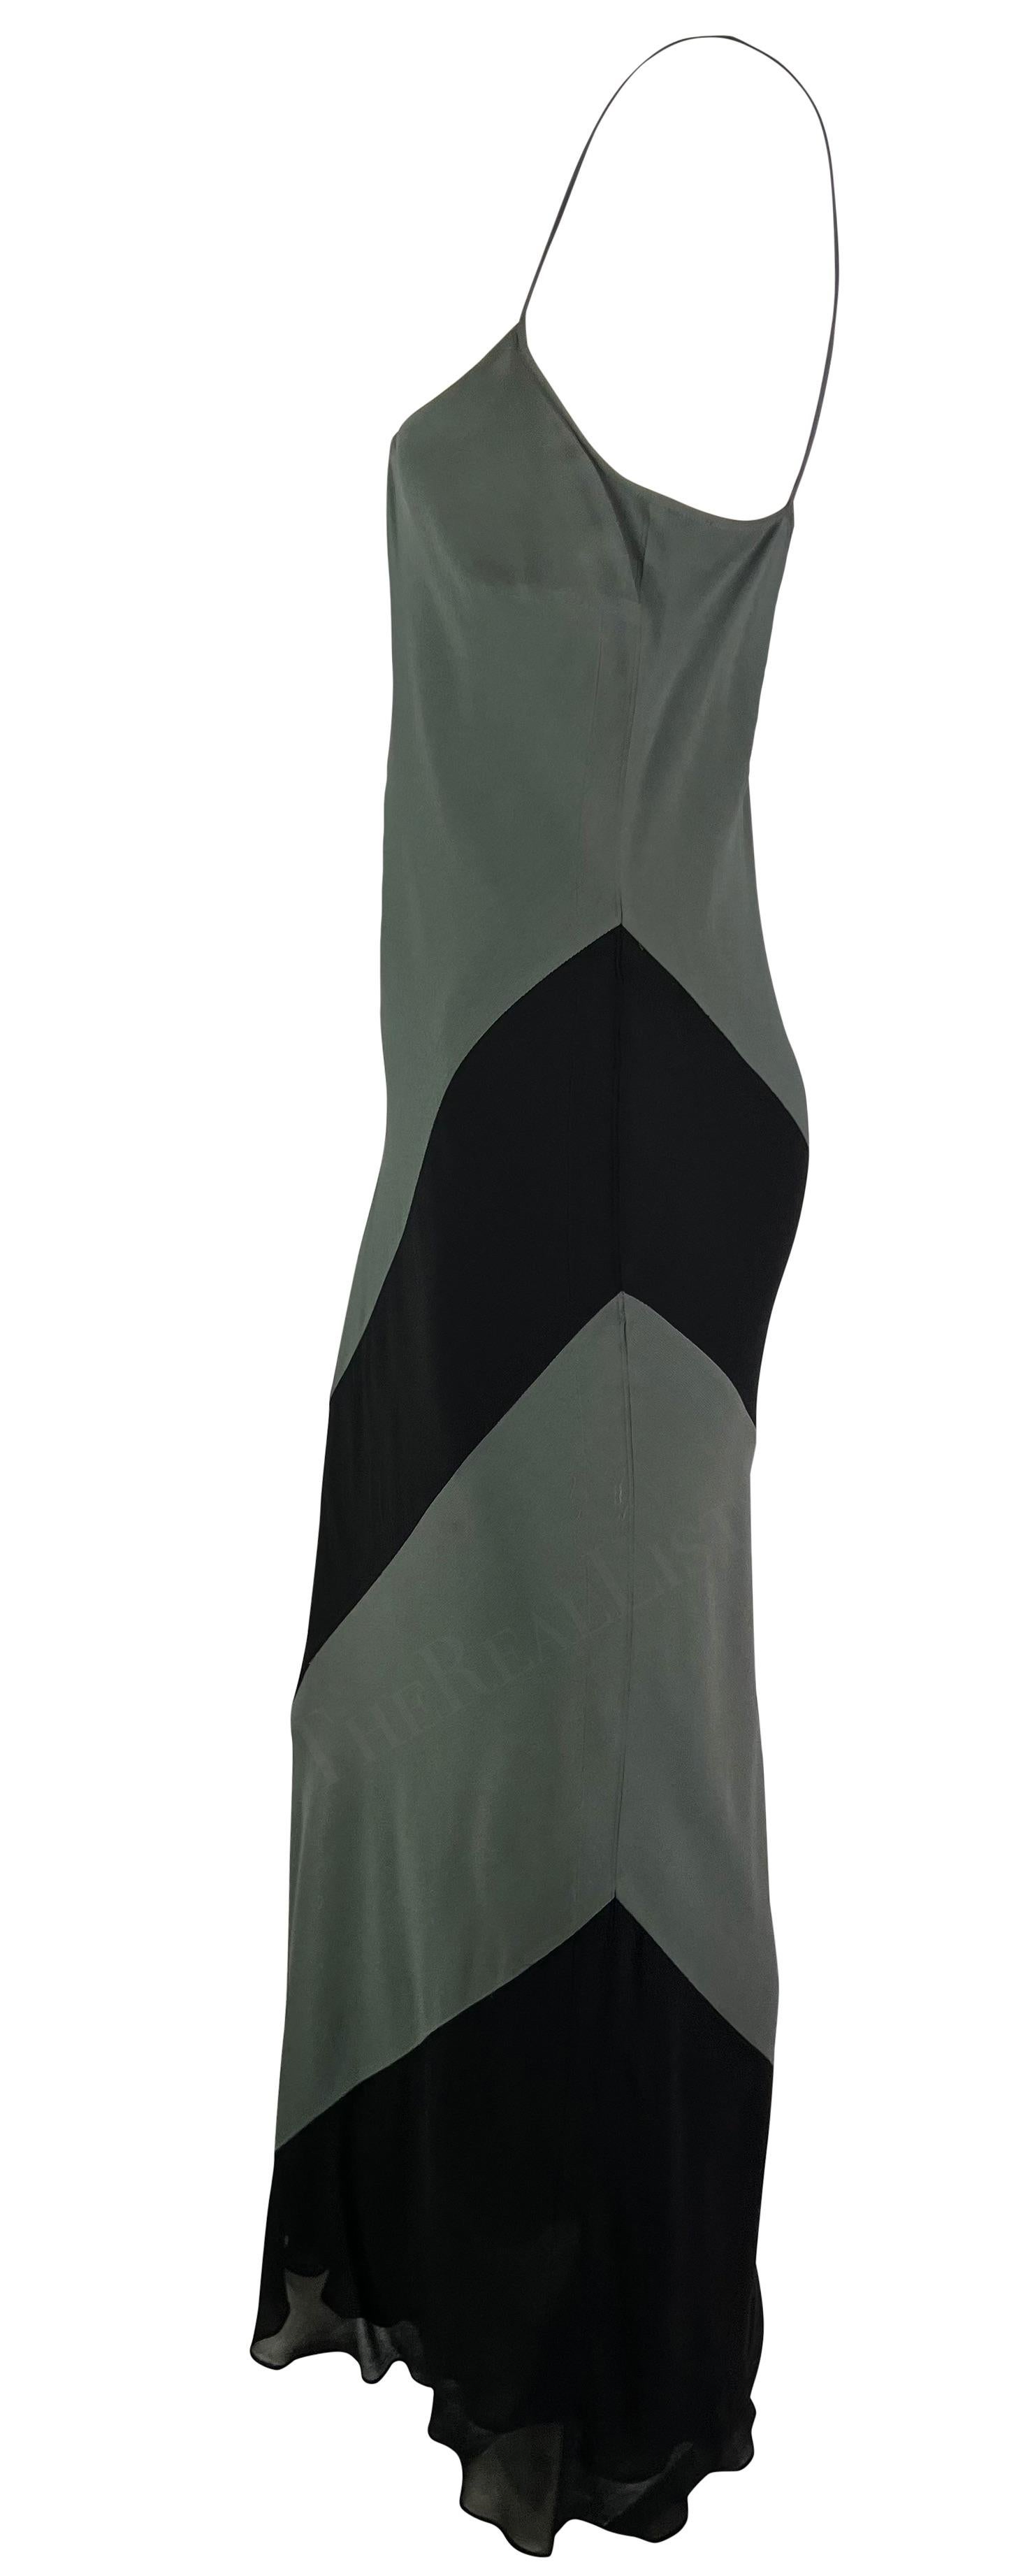 S/S 1997 Gucci by Tom Ford Grey Black Panel Slip Dress Gown For Sale 1